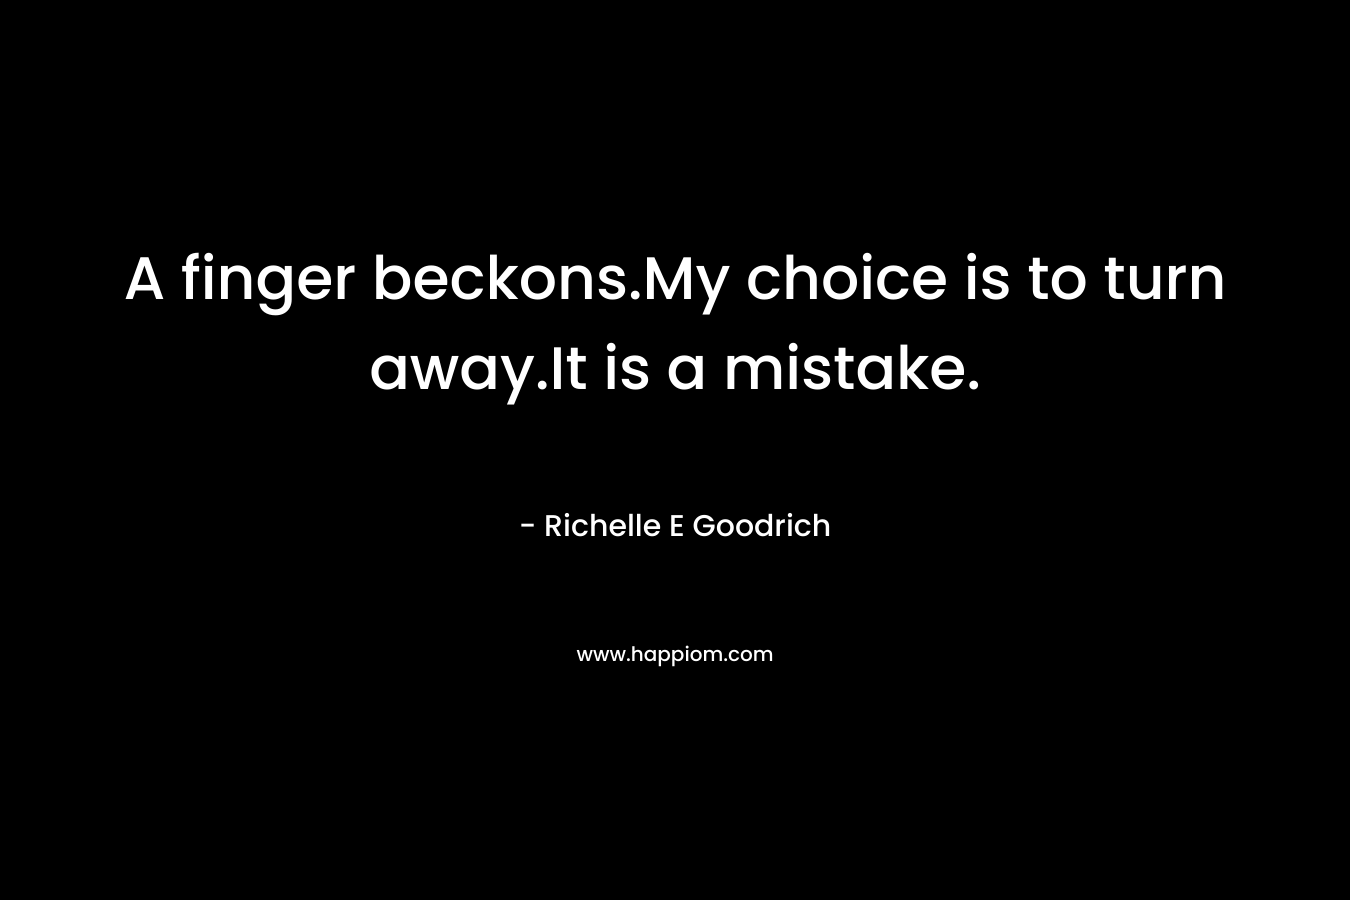 A finger beckons.My choice is to turn away.It is a mistake. – Richelle E Goodrich